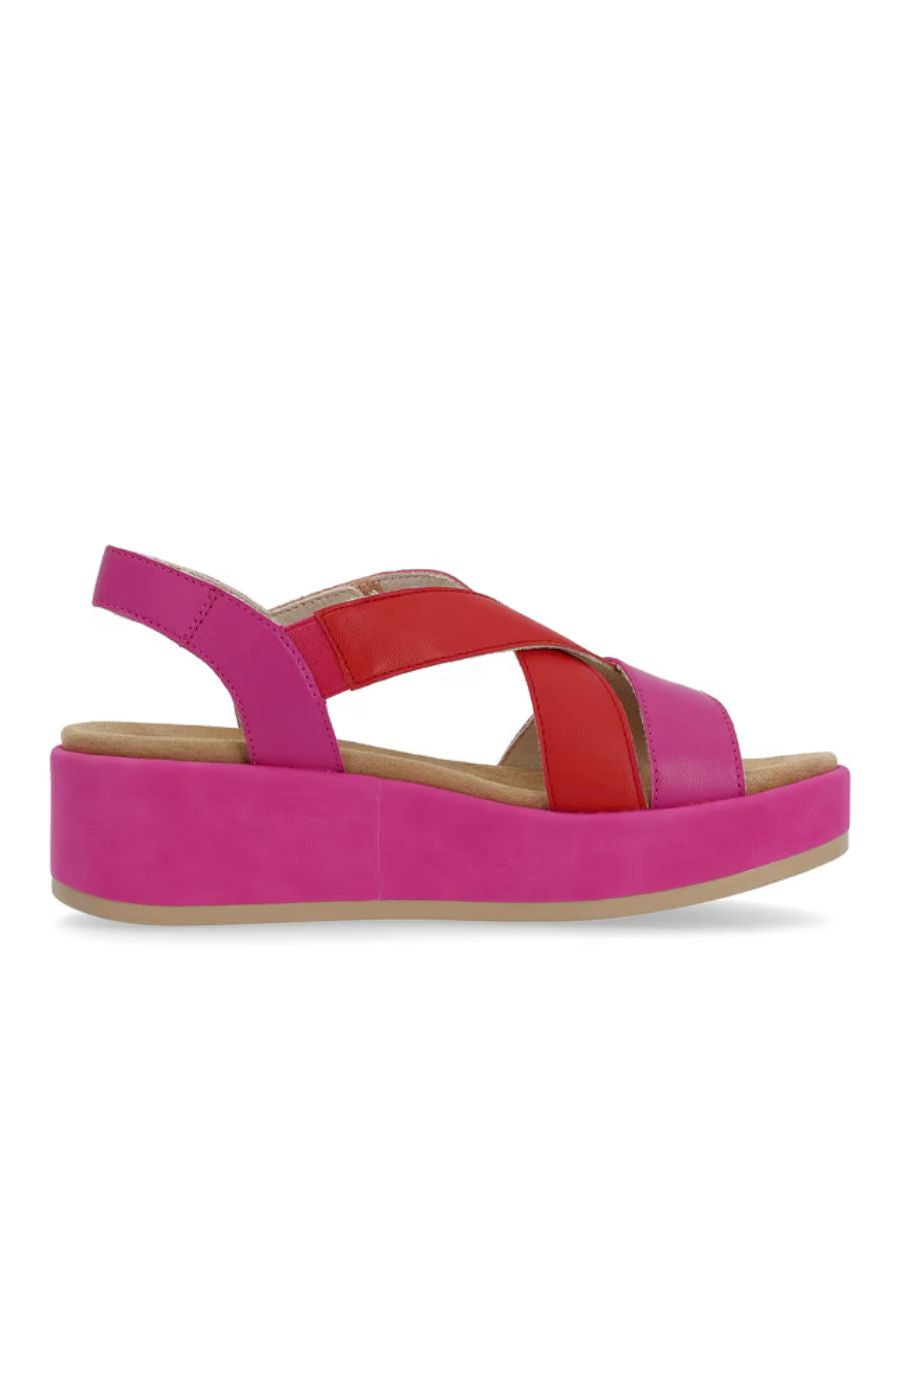 Remonte Wedge Sandal in Pink